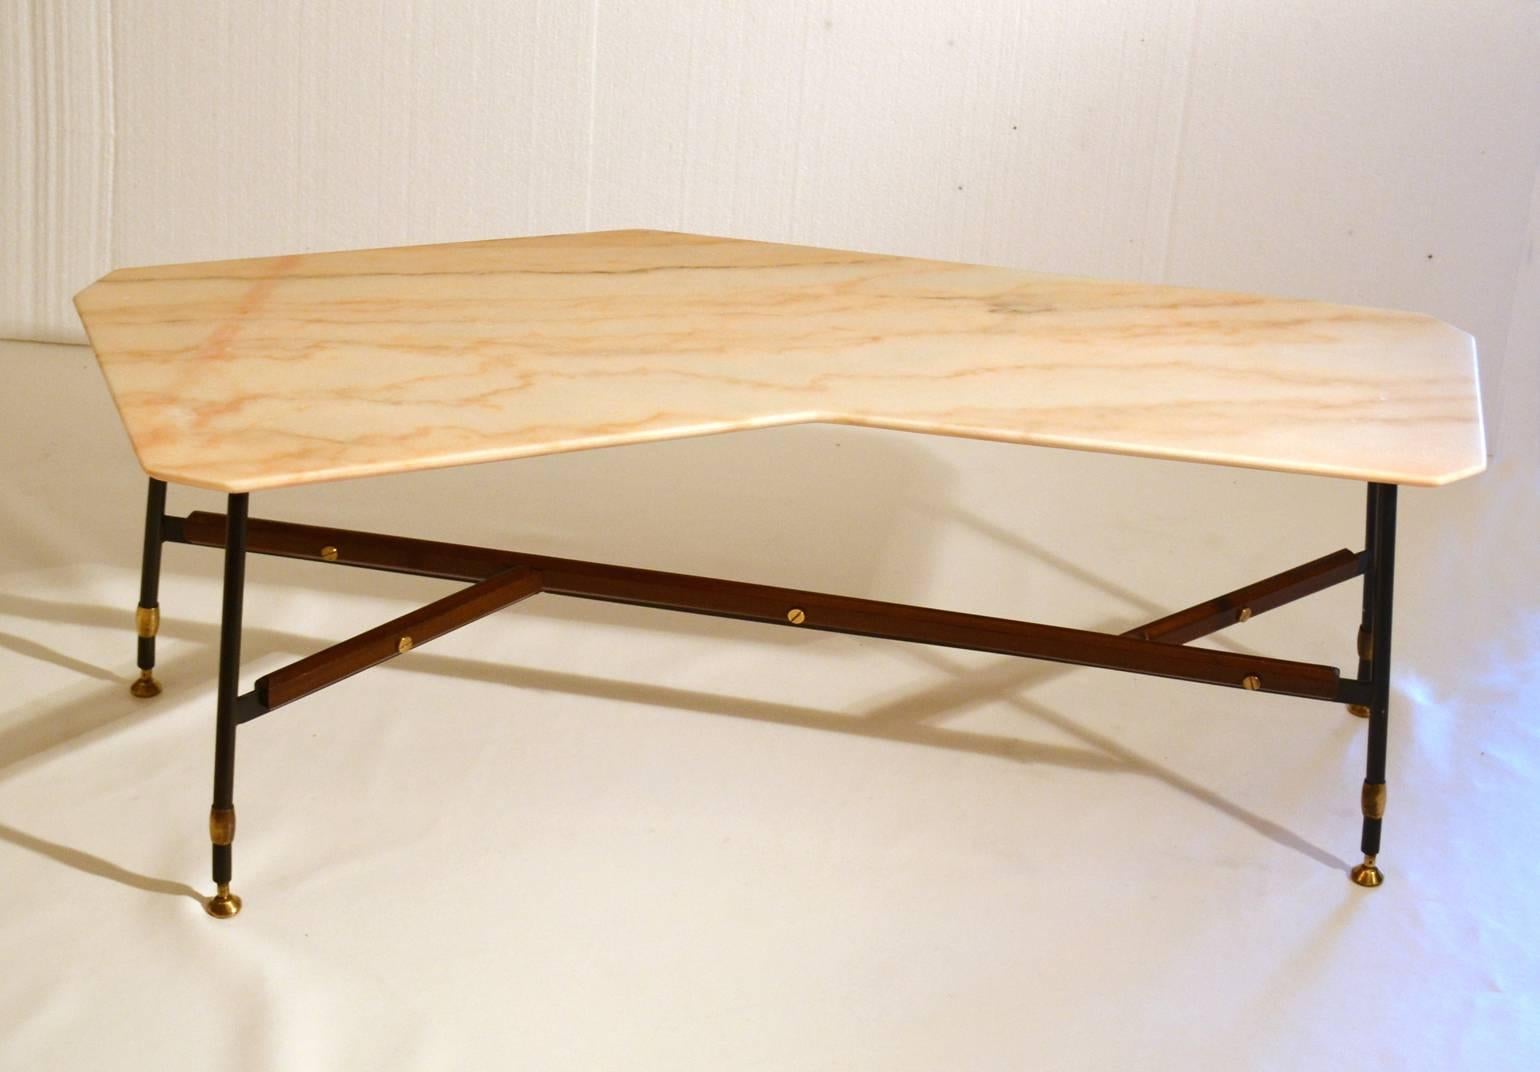 Marble coffee table, off-white with peach color veins, is cut in free form geometrical shape. The black metal frame has strips of mahogany attached and stands on brass feet. The table is versatile in use; perfect as a center table but due to its